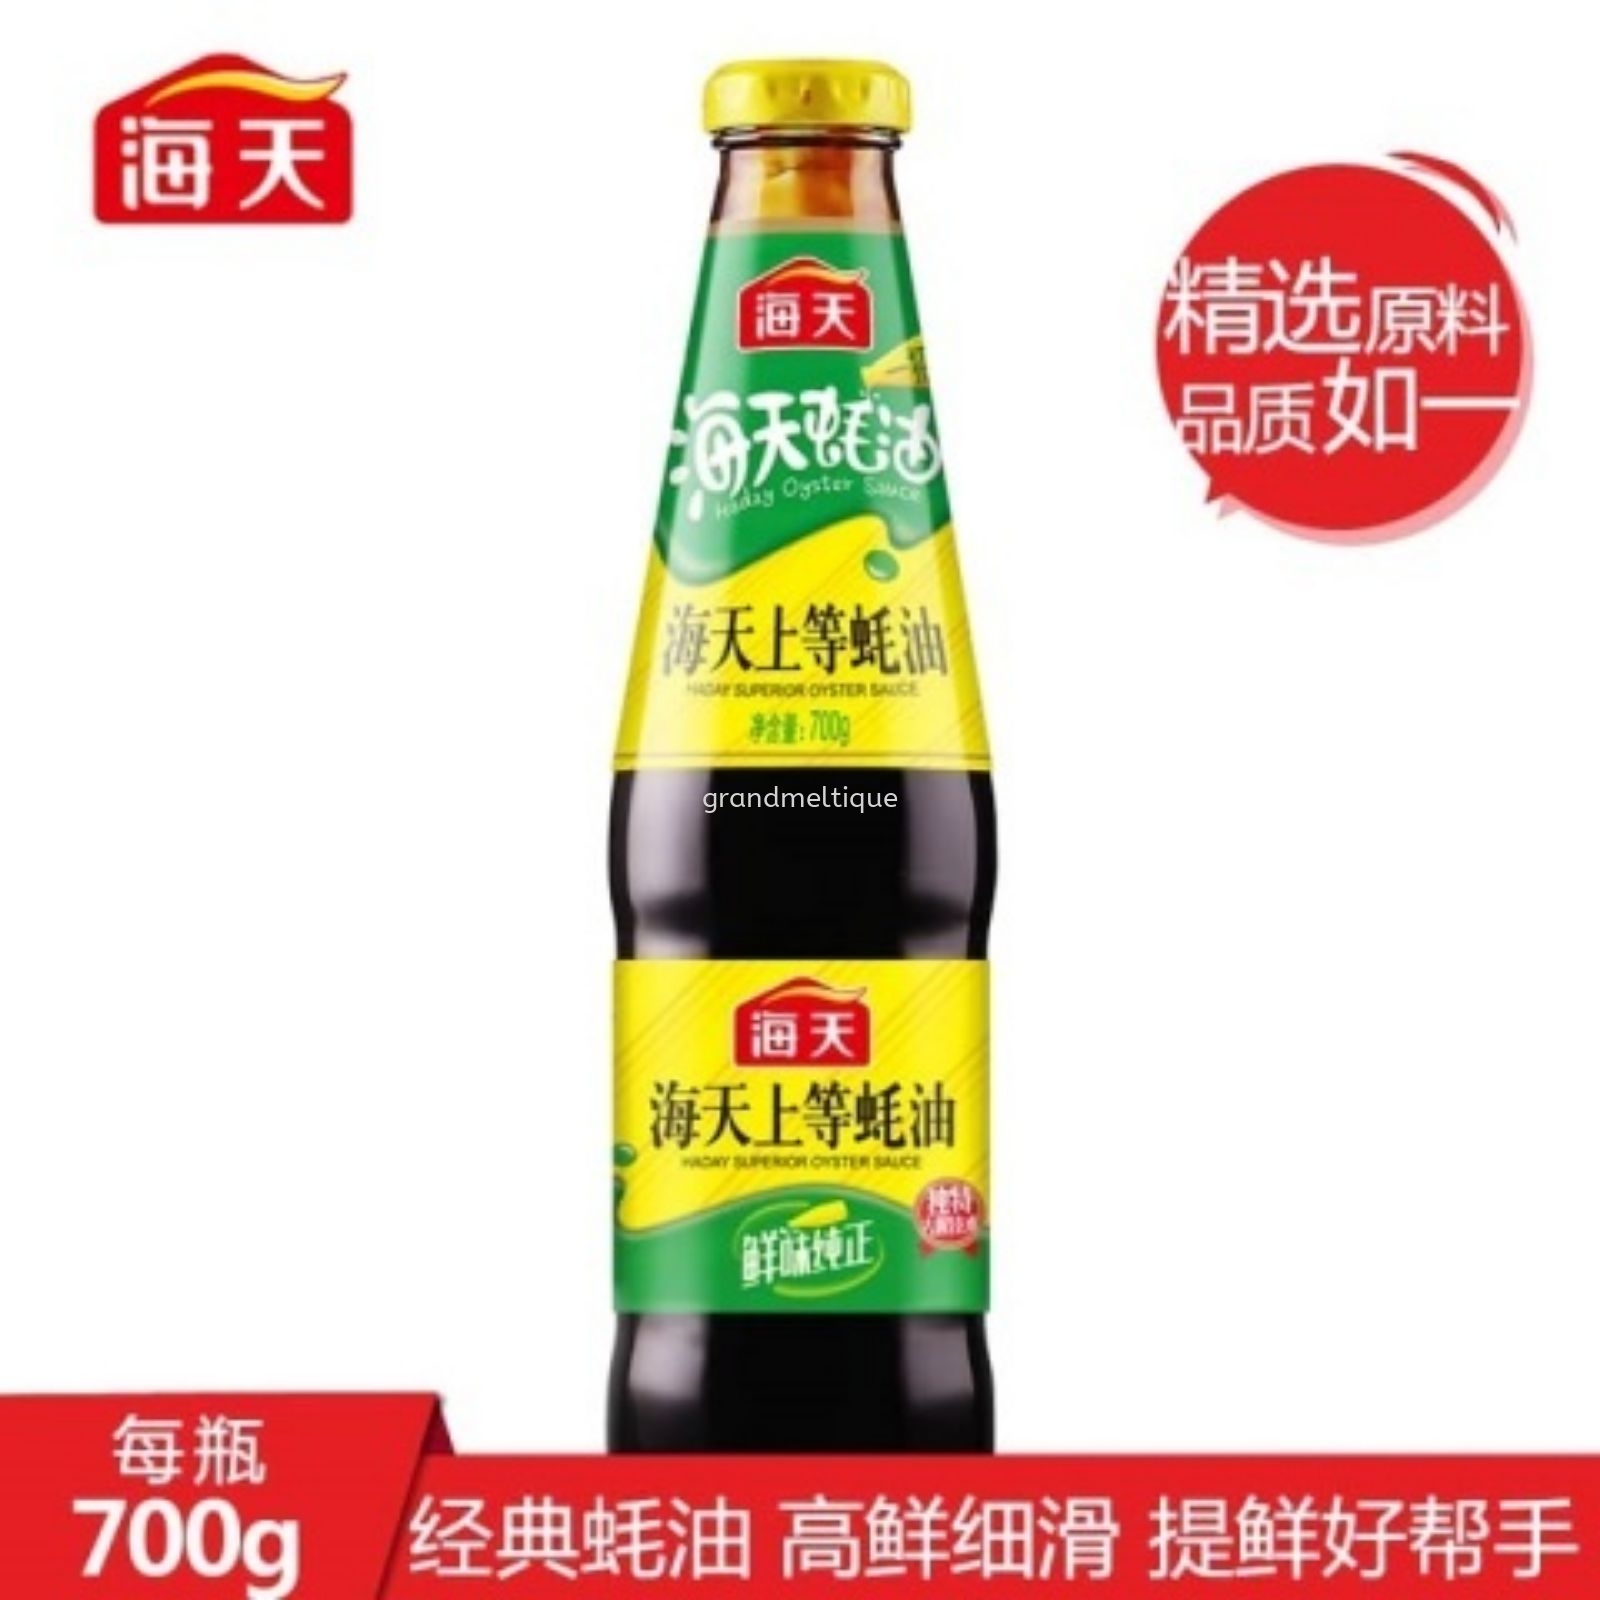 HADAY SUPERIOR OYSTER SAUCE 